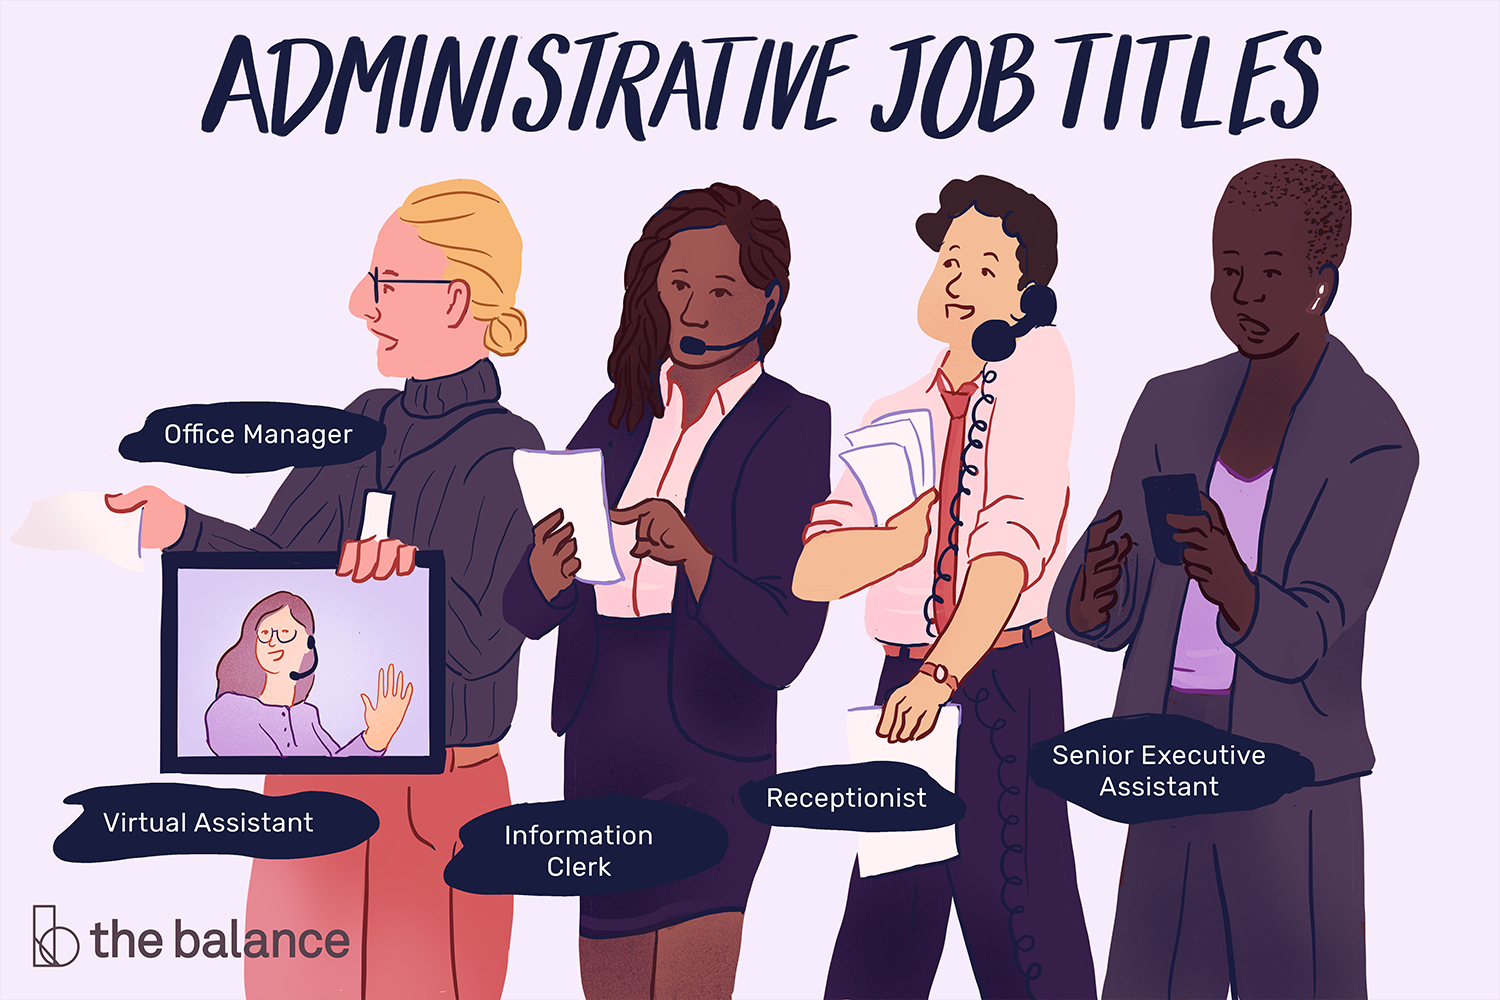 Administrative Jobs Options Job Titles And Descriptions throughout dimensions 1500 X 1000